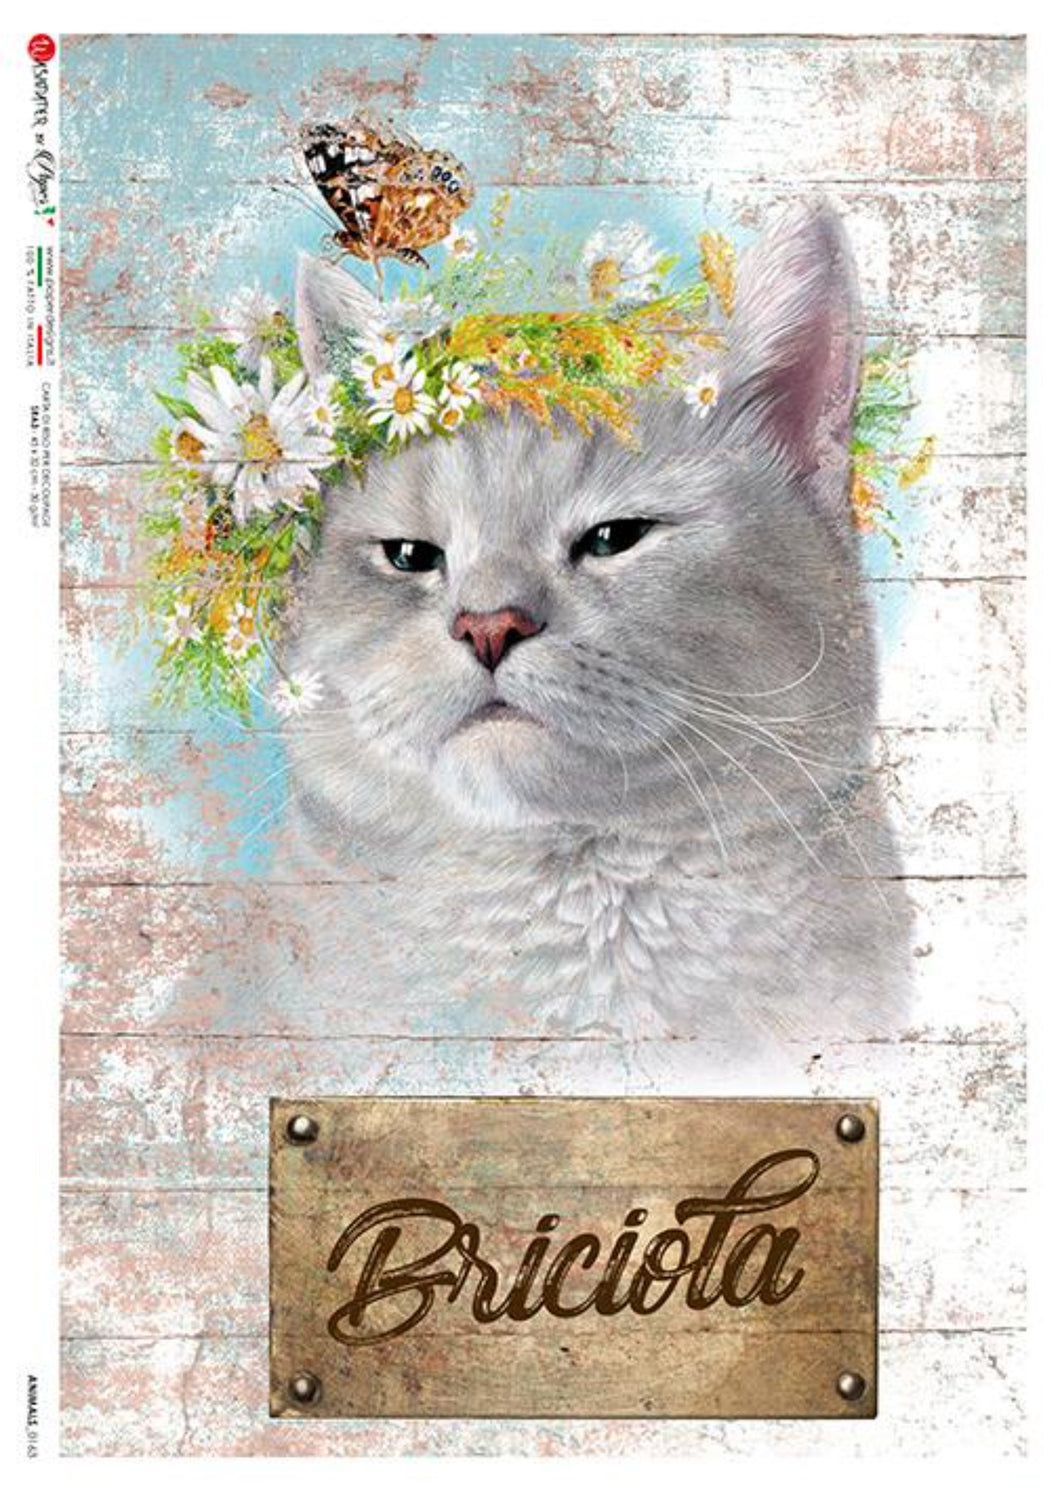 Animals 0163 Paper Designs Washi Paper, Decouapge, White Cat with Floral Wreath on Head